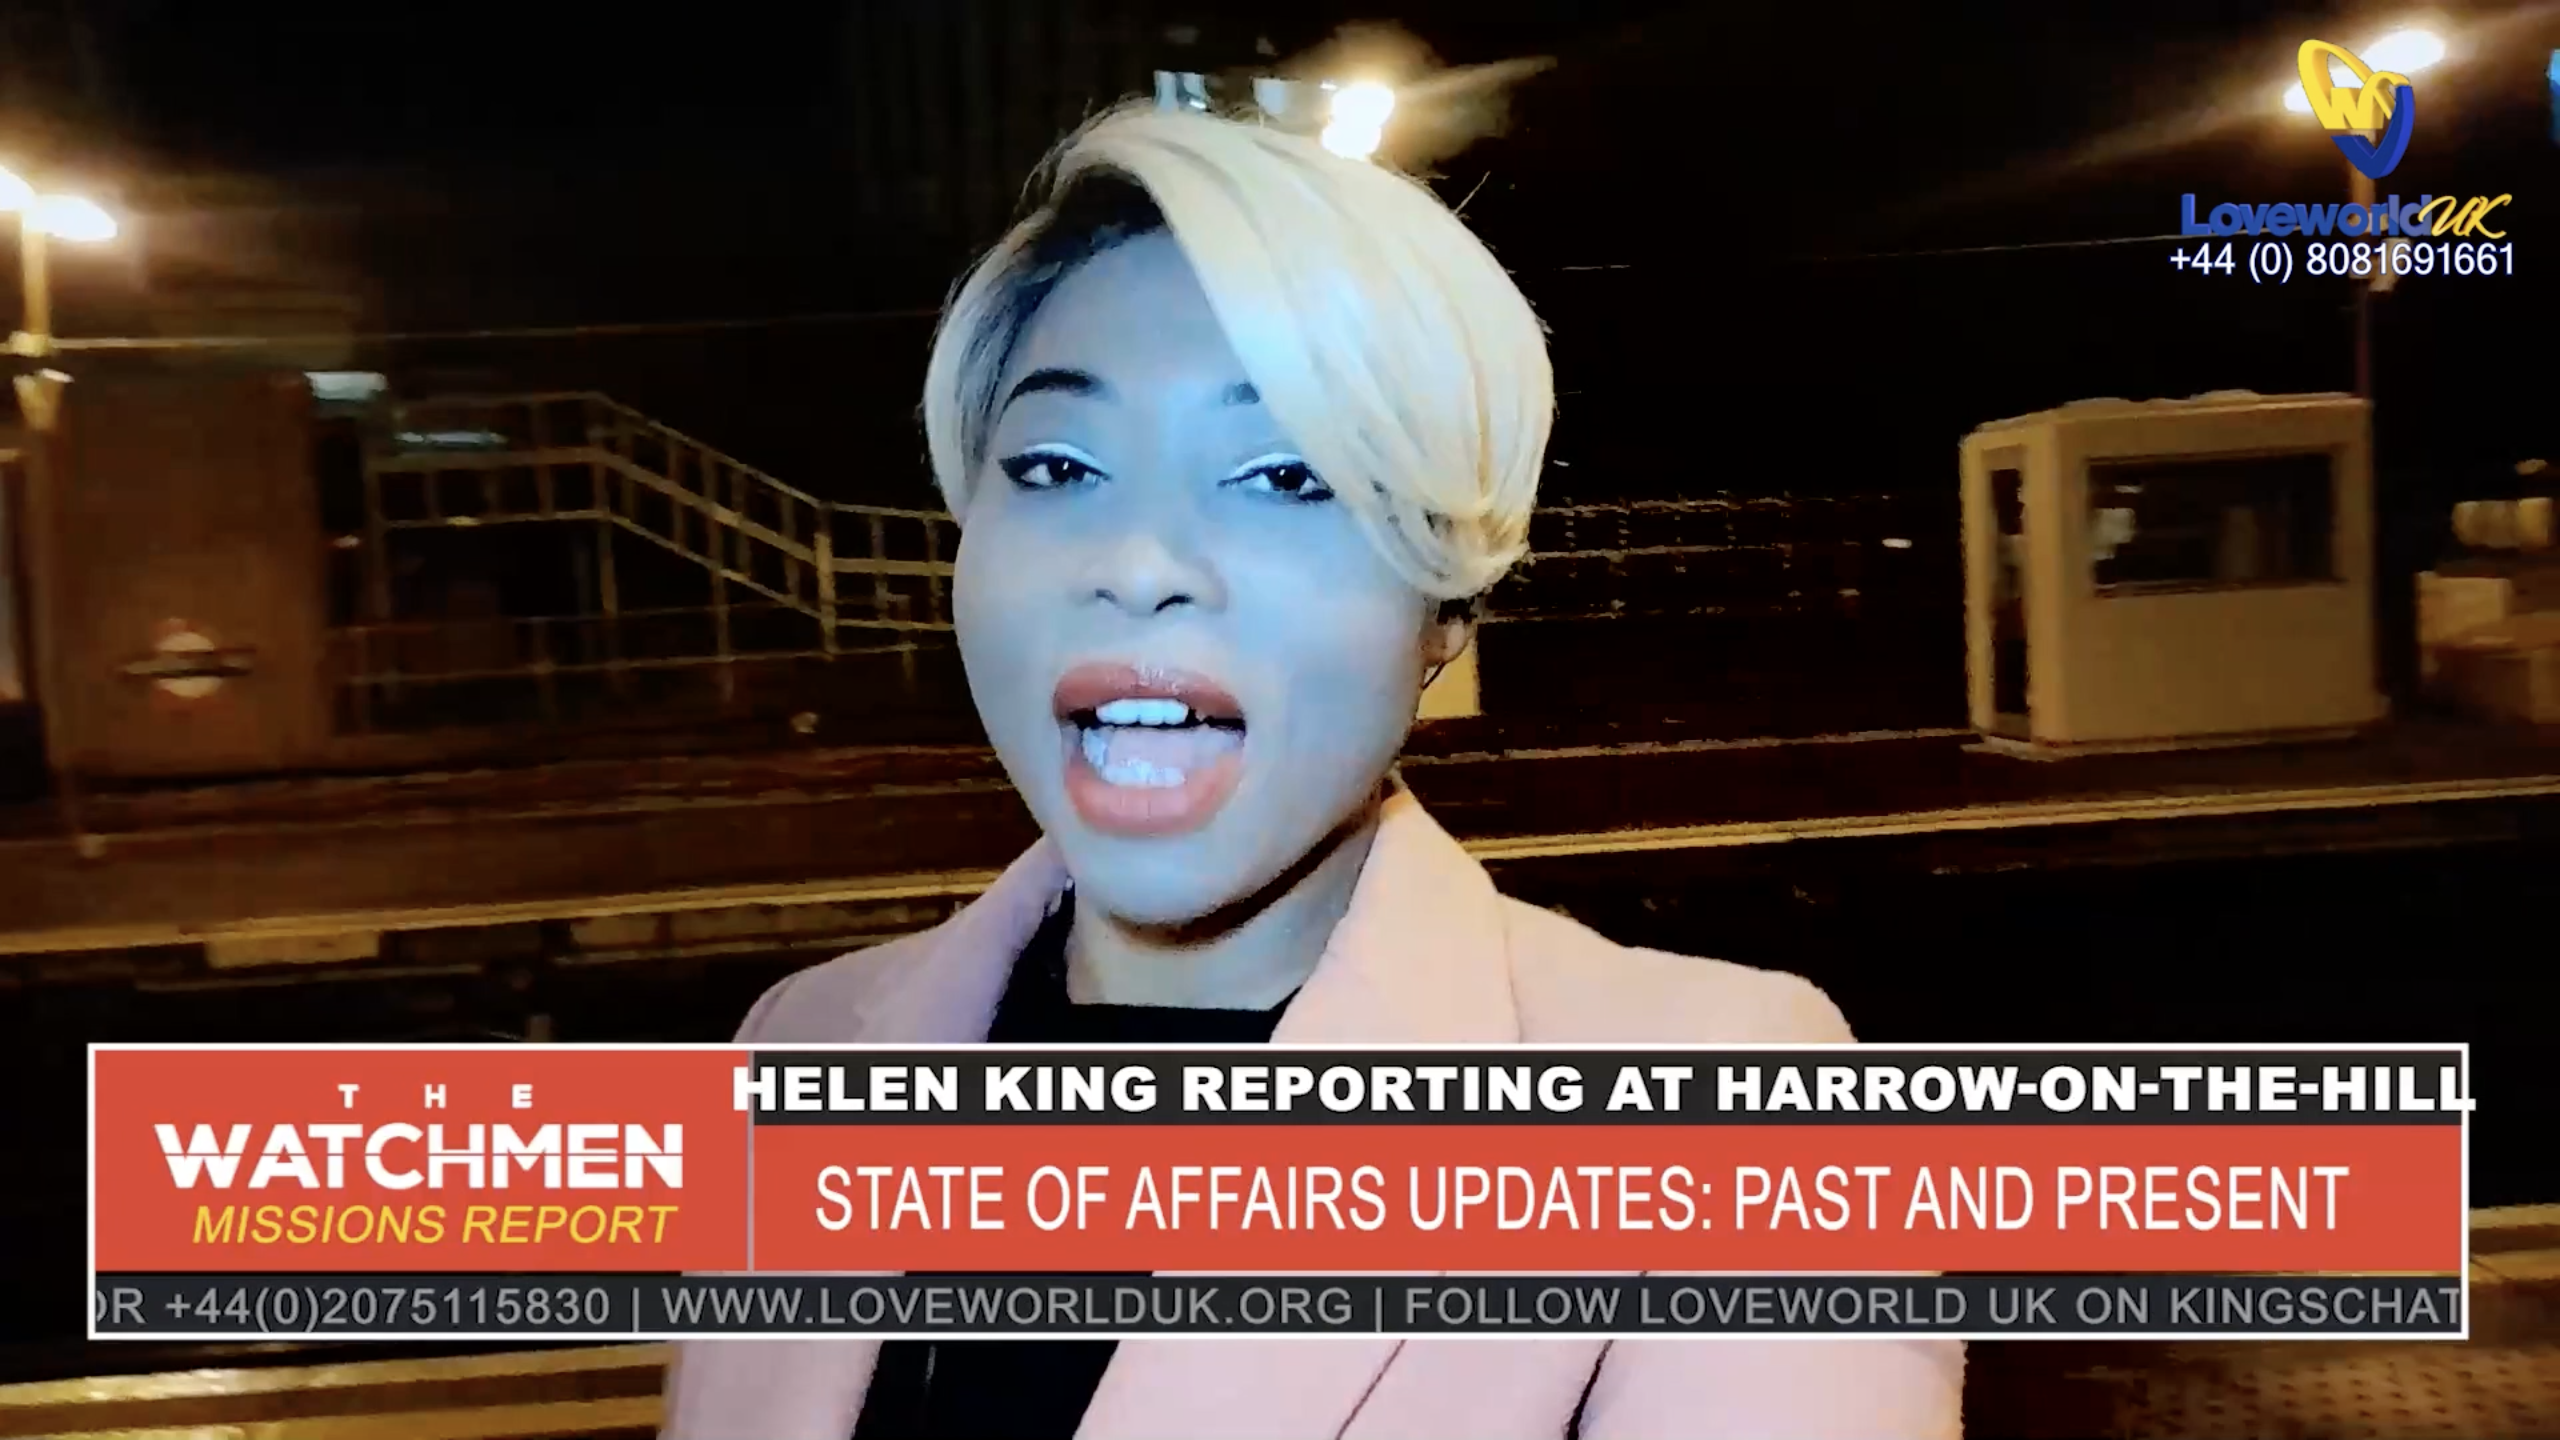 THE WATCHMEN_EP 100: HELEN KING'S SPECIAL REPORTS IN ICONIC LOCATIONS_TOTTENHAM, HARROW-ON-THE-HILL, PINNER, NORTHWOOD, HARROW